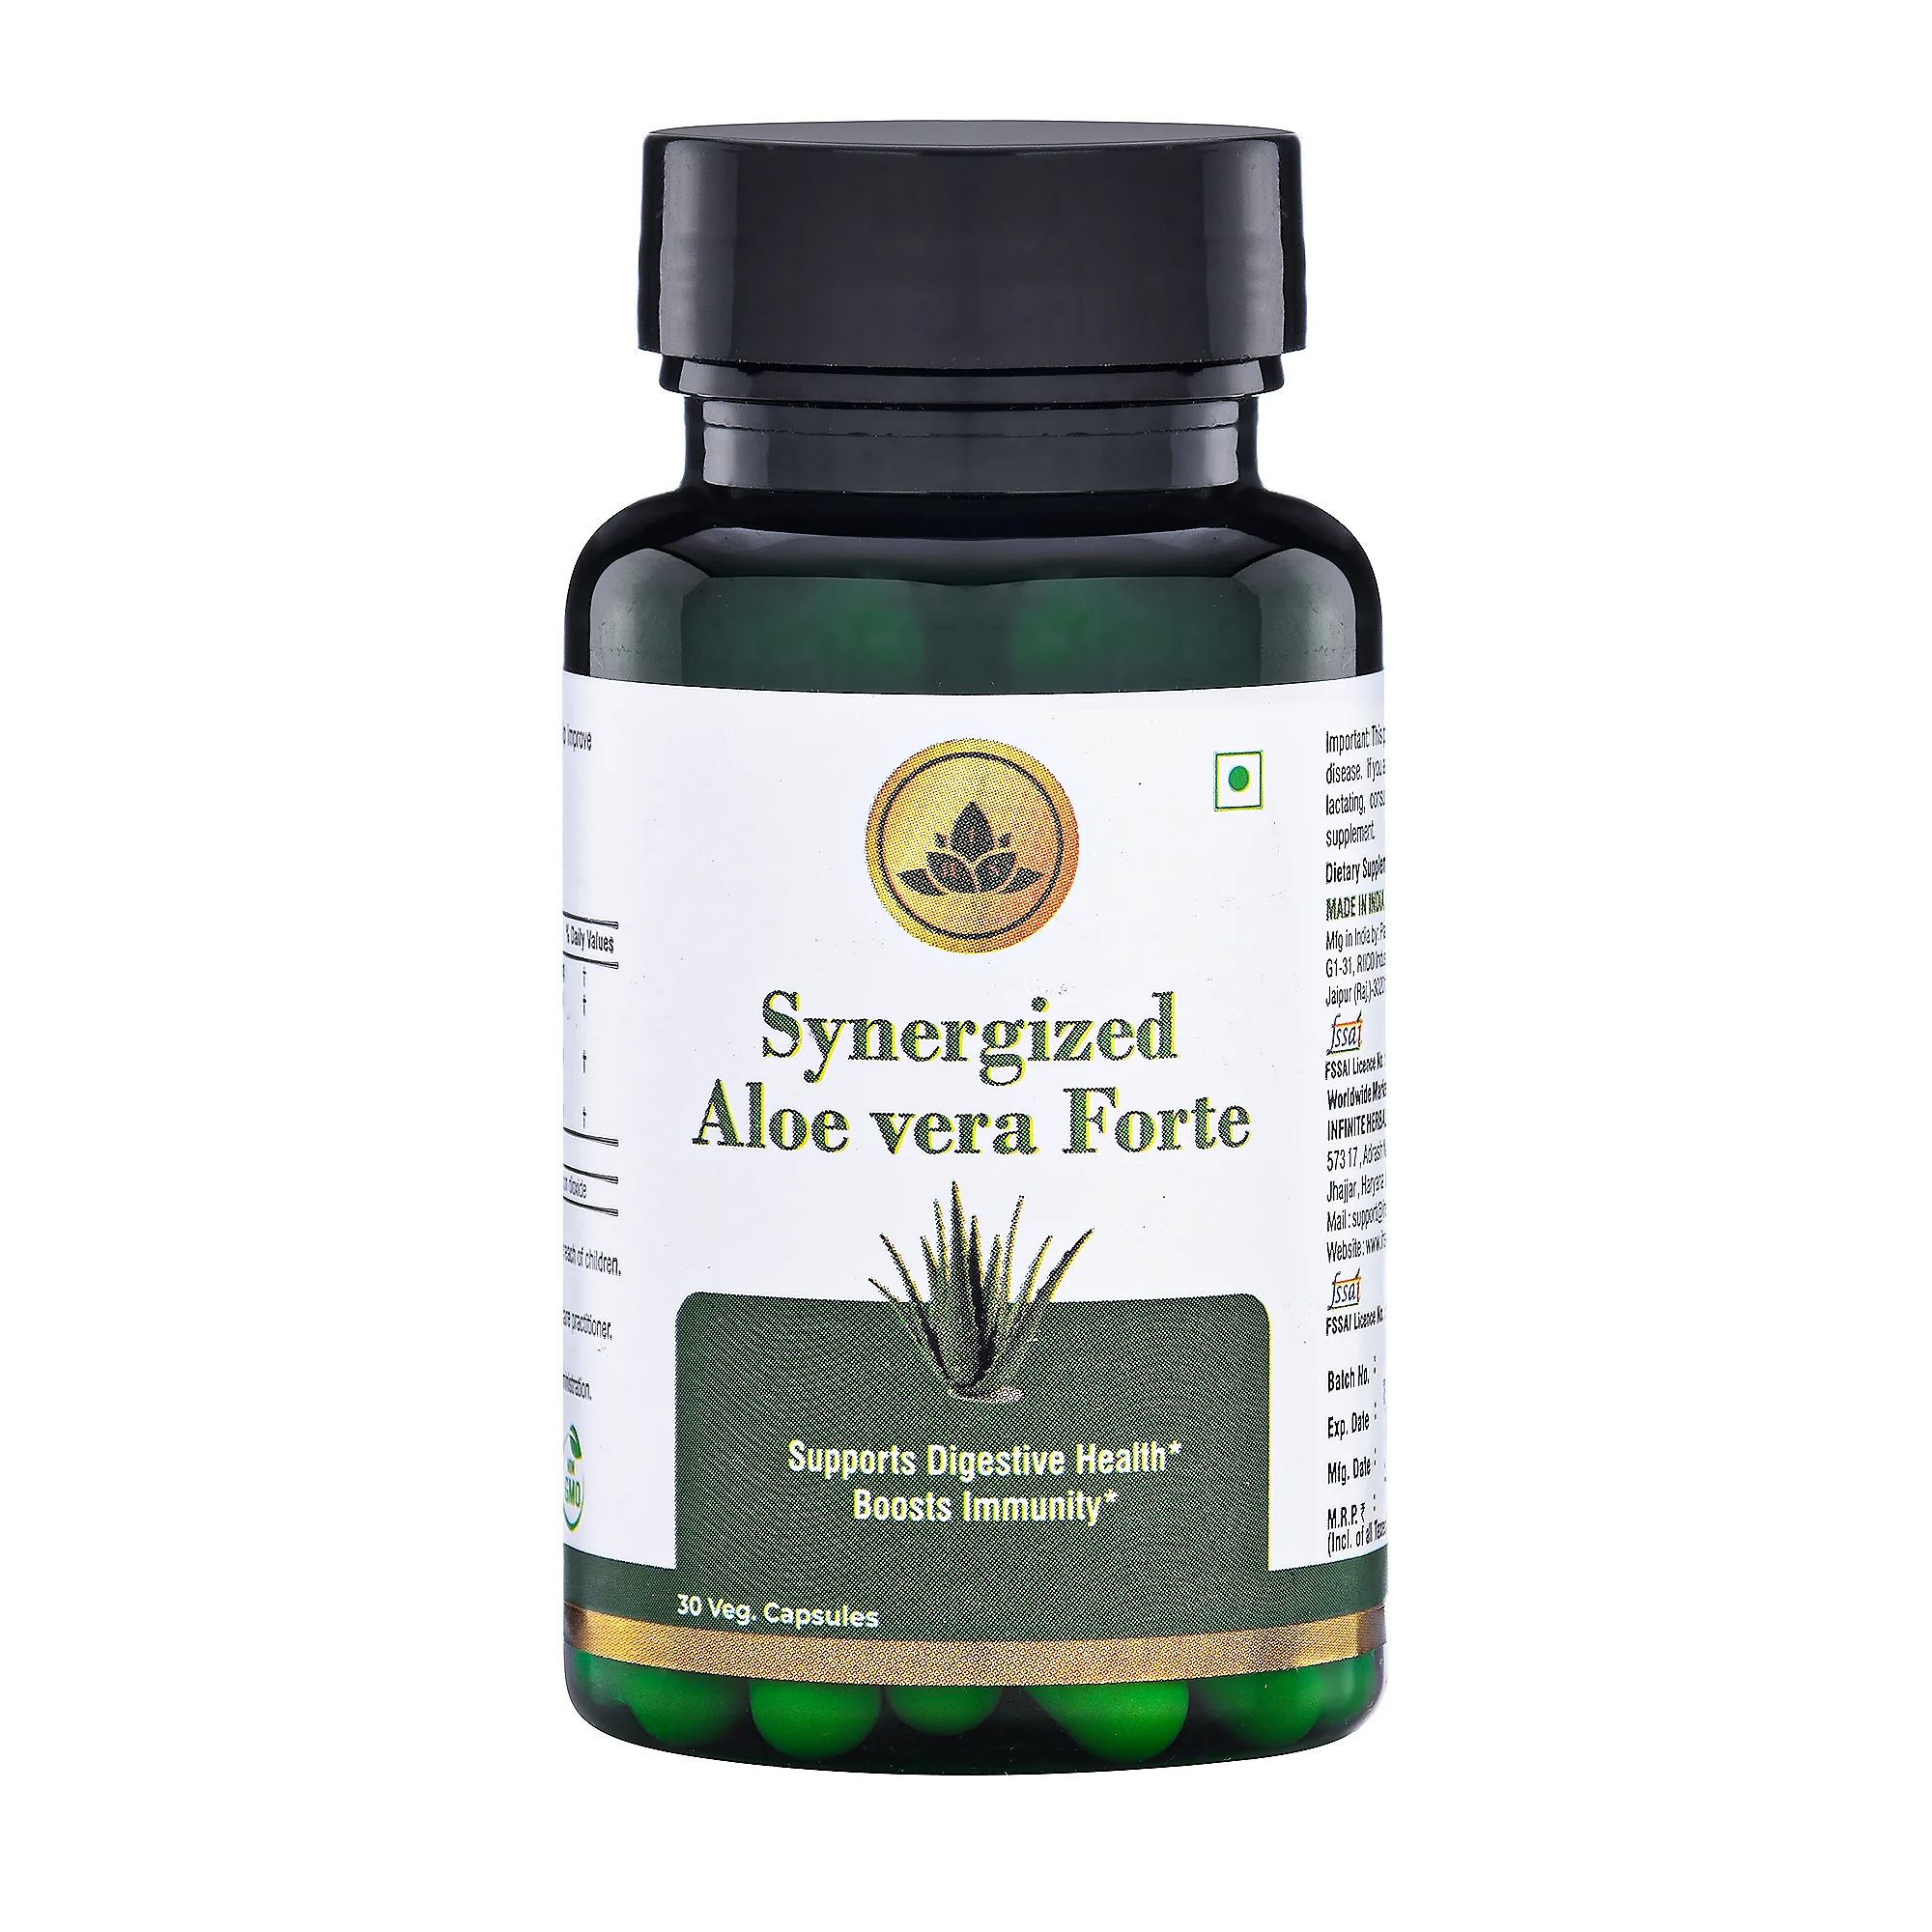 Synergized Aloe vera Forte Herbal Metabolism Boosters